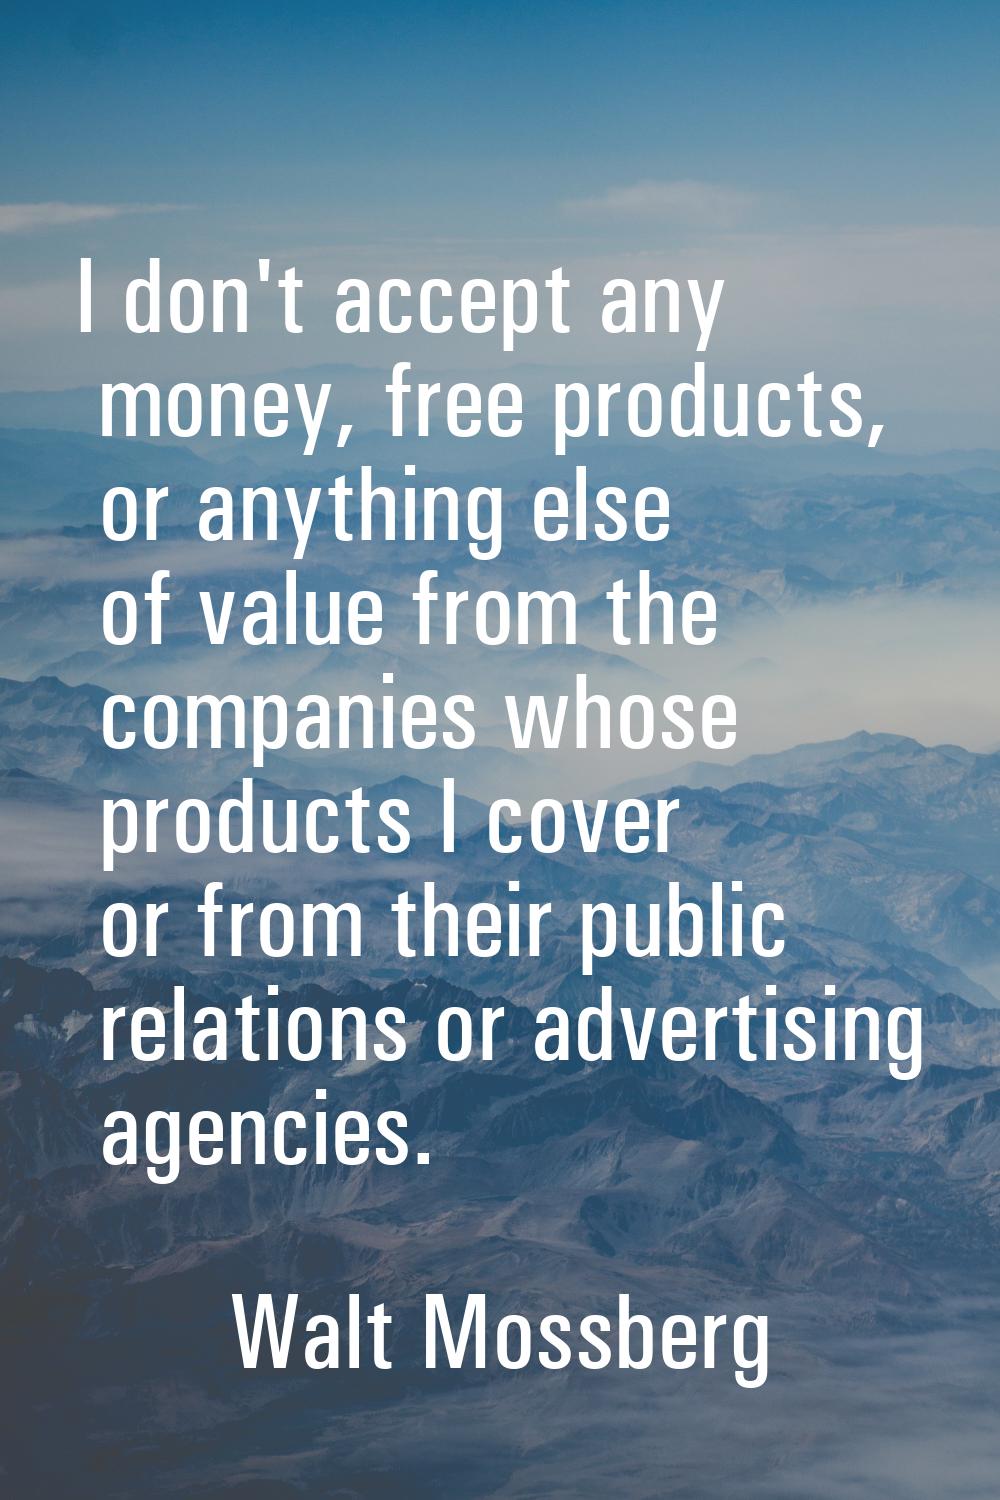 I don't accept any money, free products, or anything else of value from the companies whose product